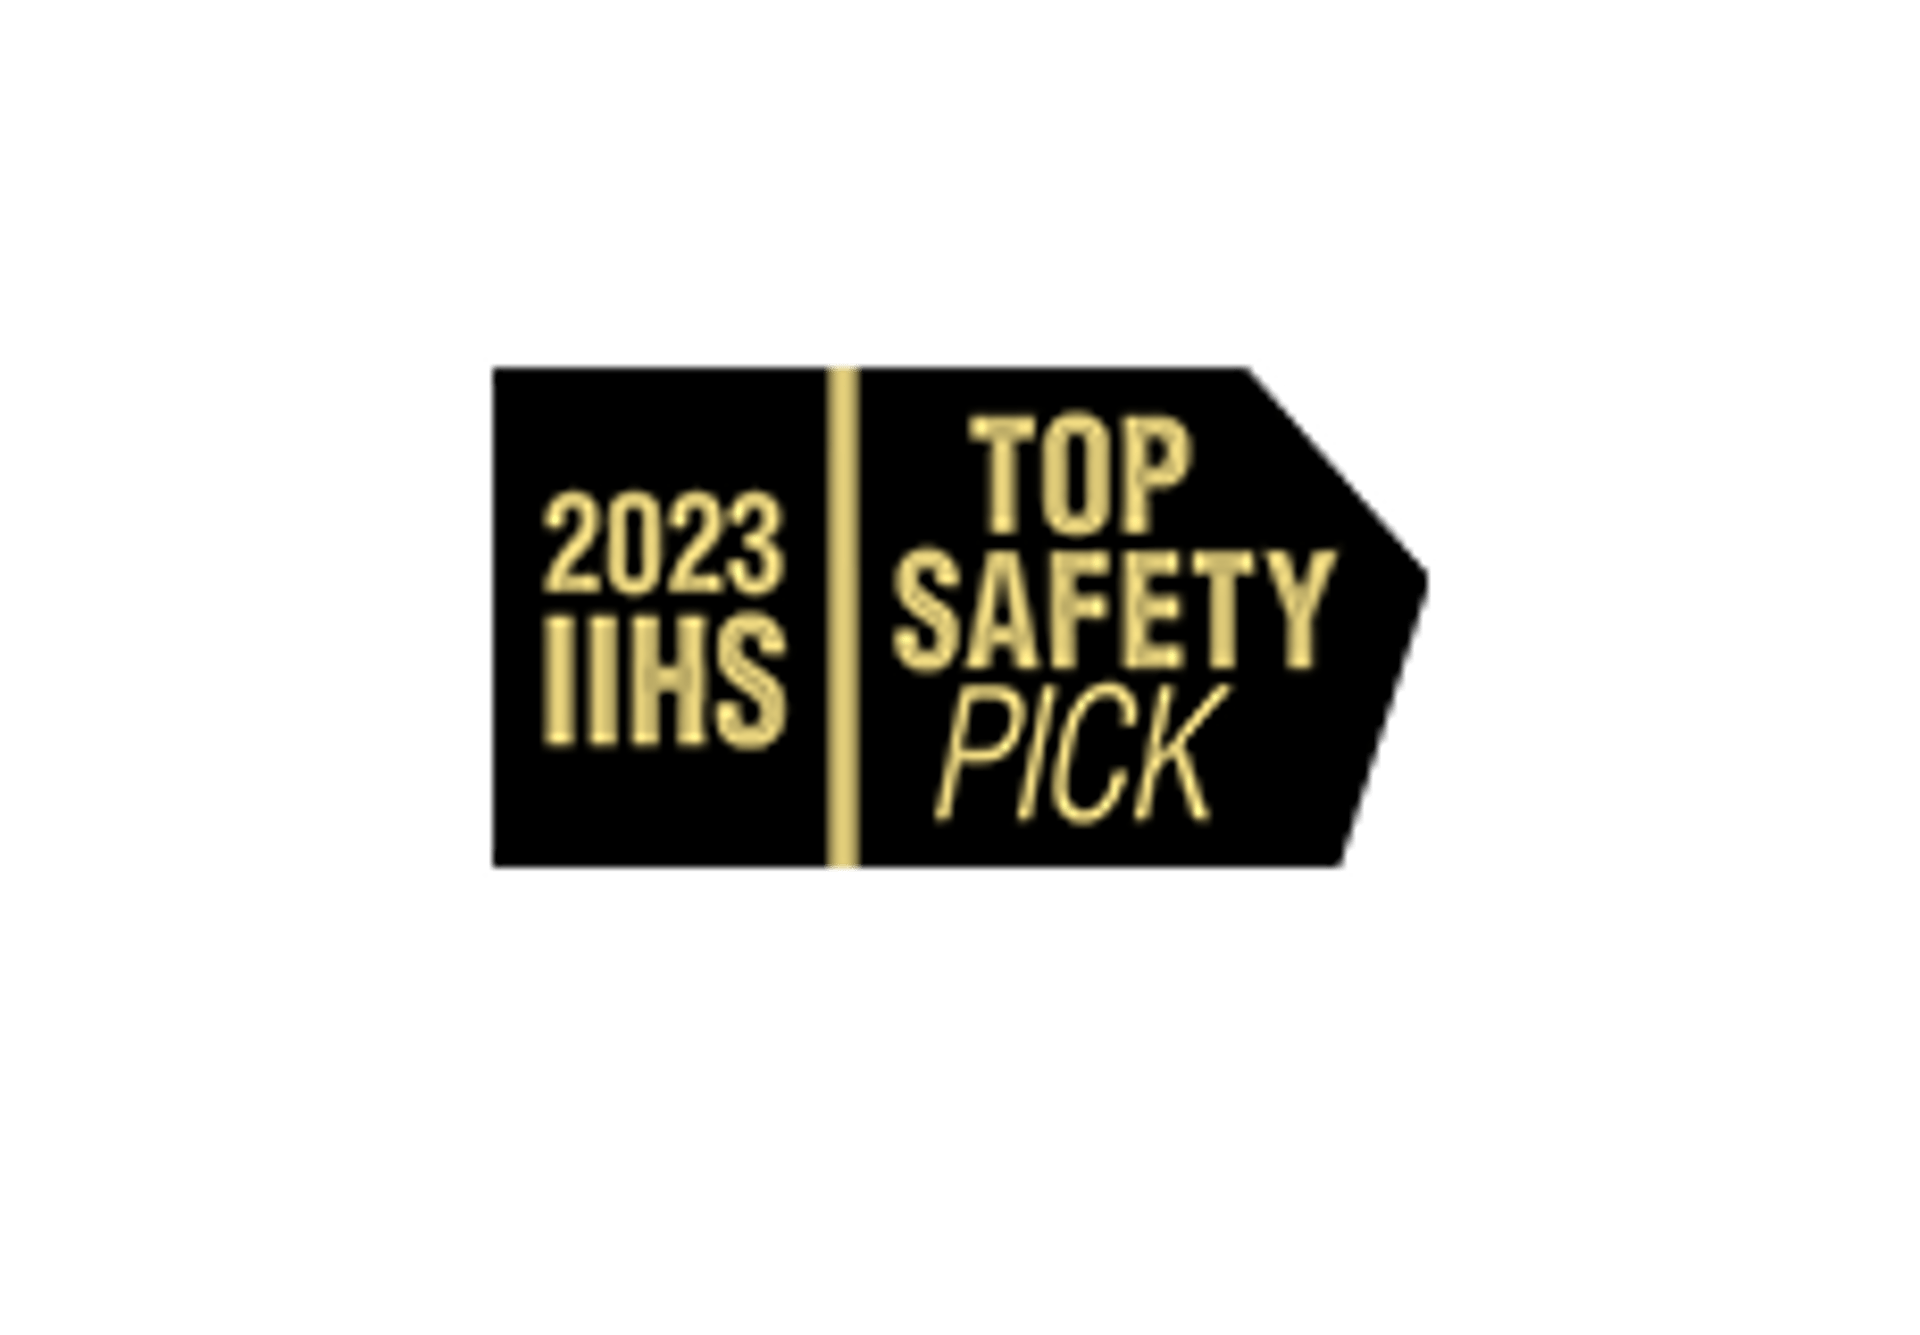 IIHS TOP SAFETY PICK